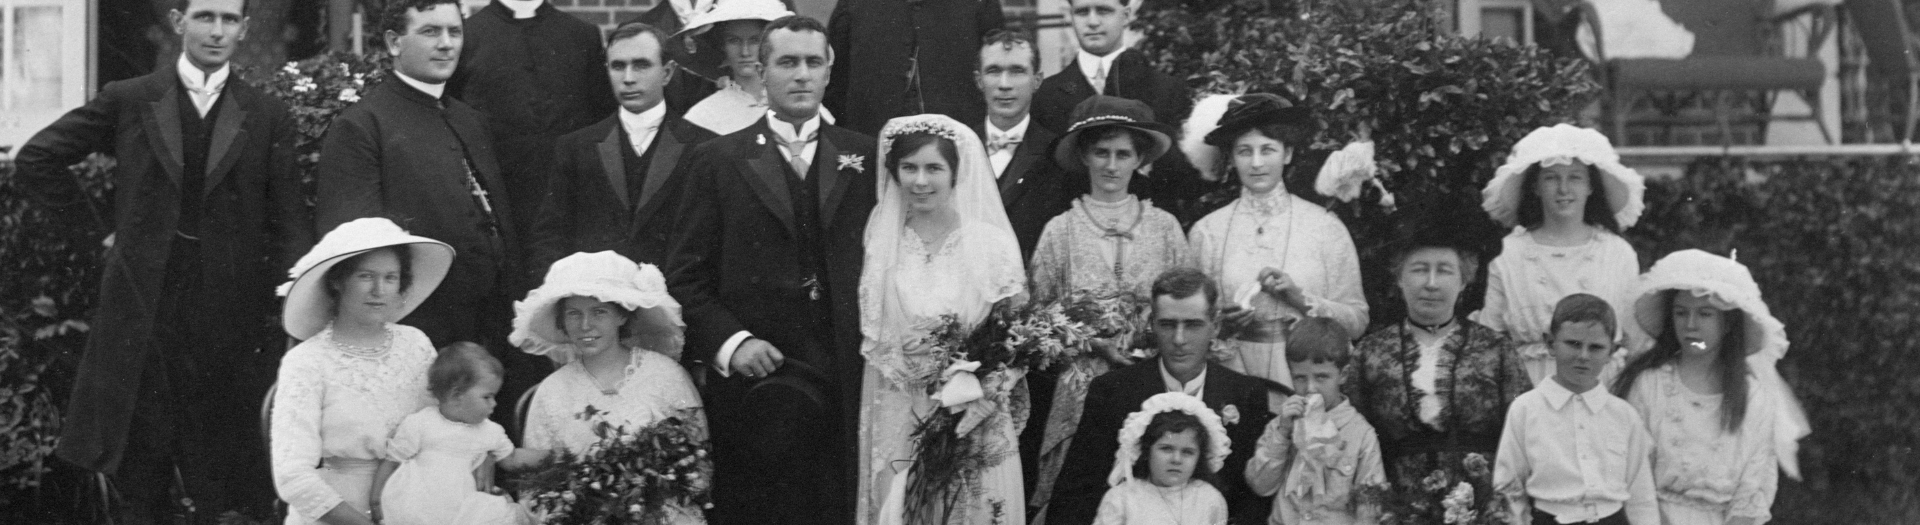 Group of men, women and children, including a bride and groom, dressed formally smiling